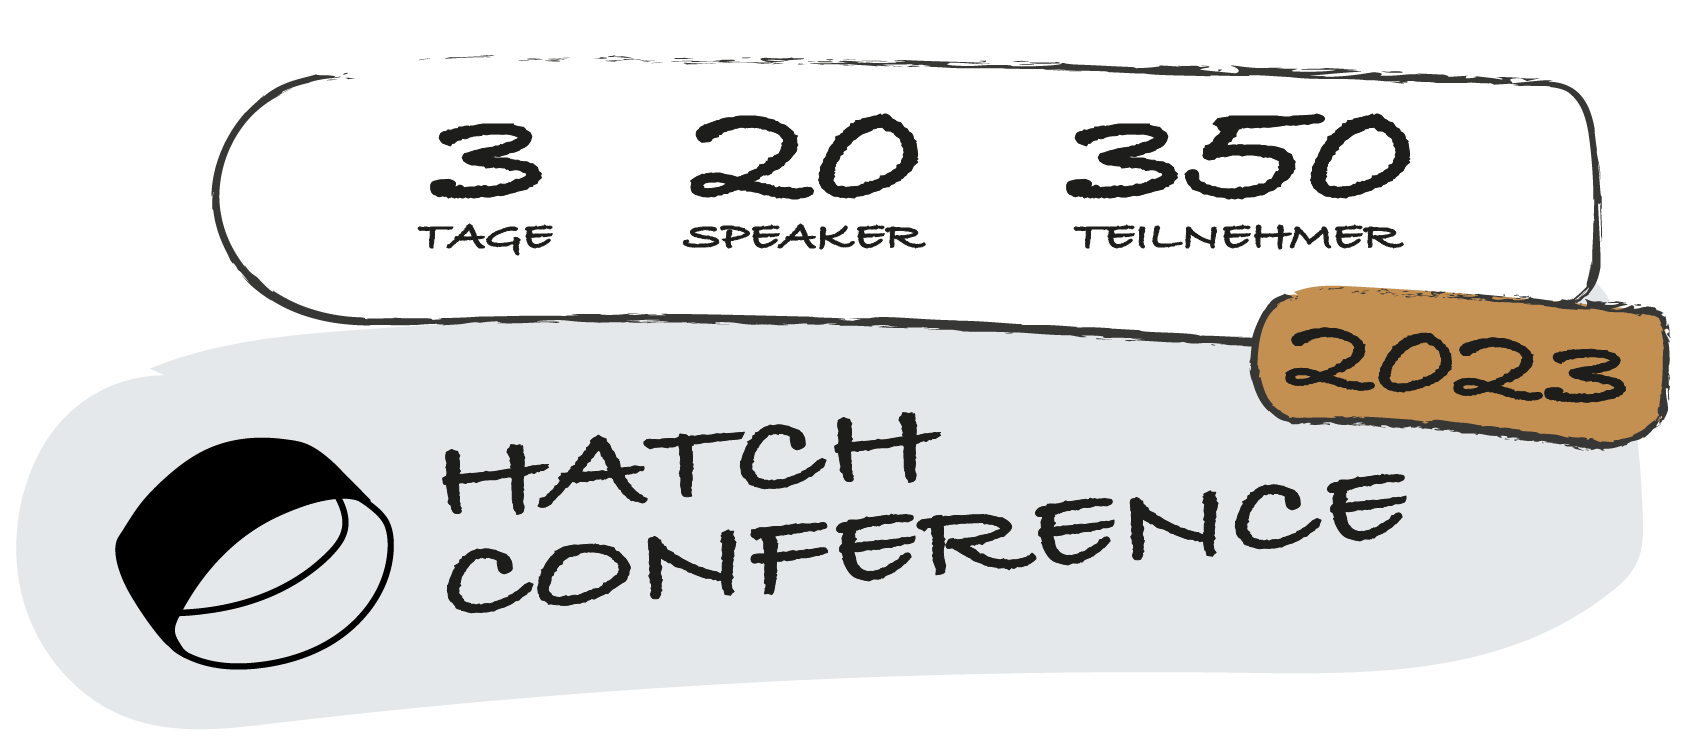 Hatch Conference 2023